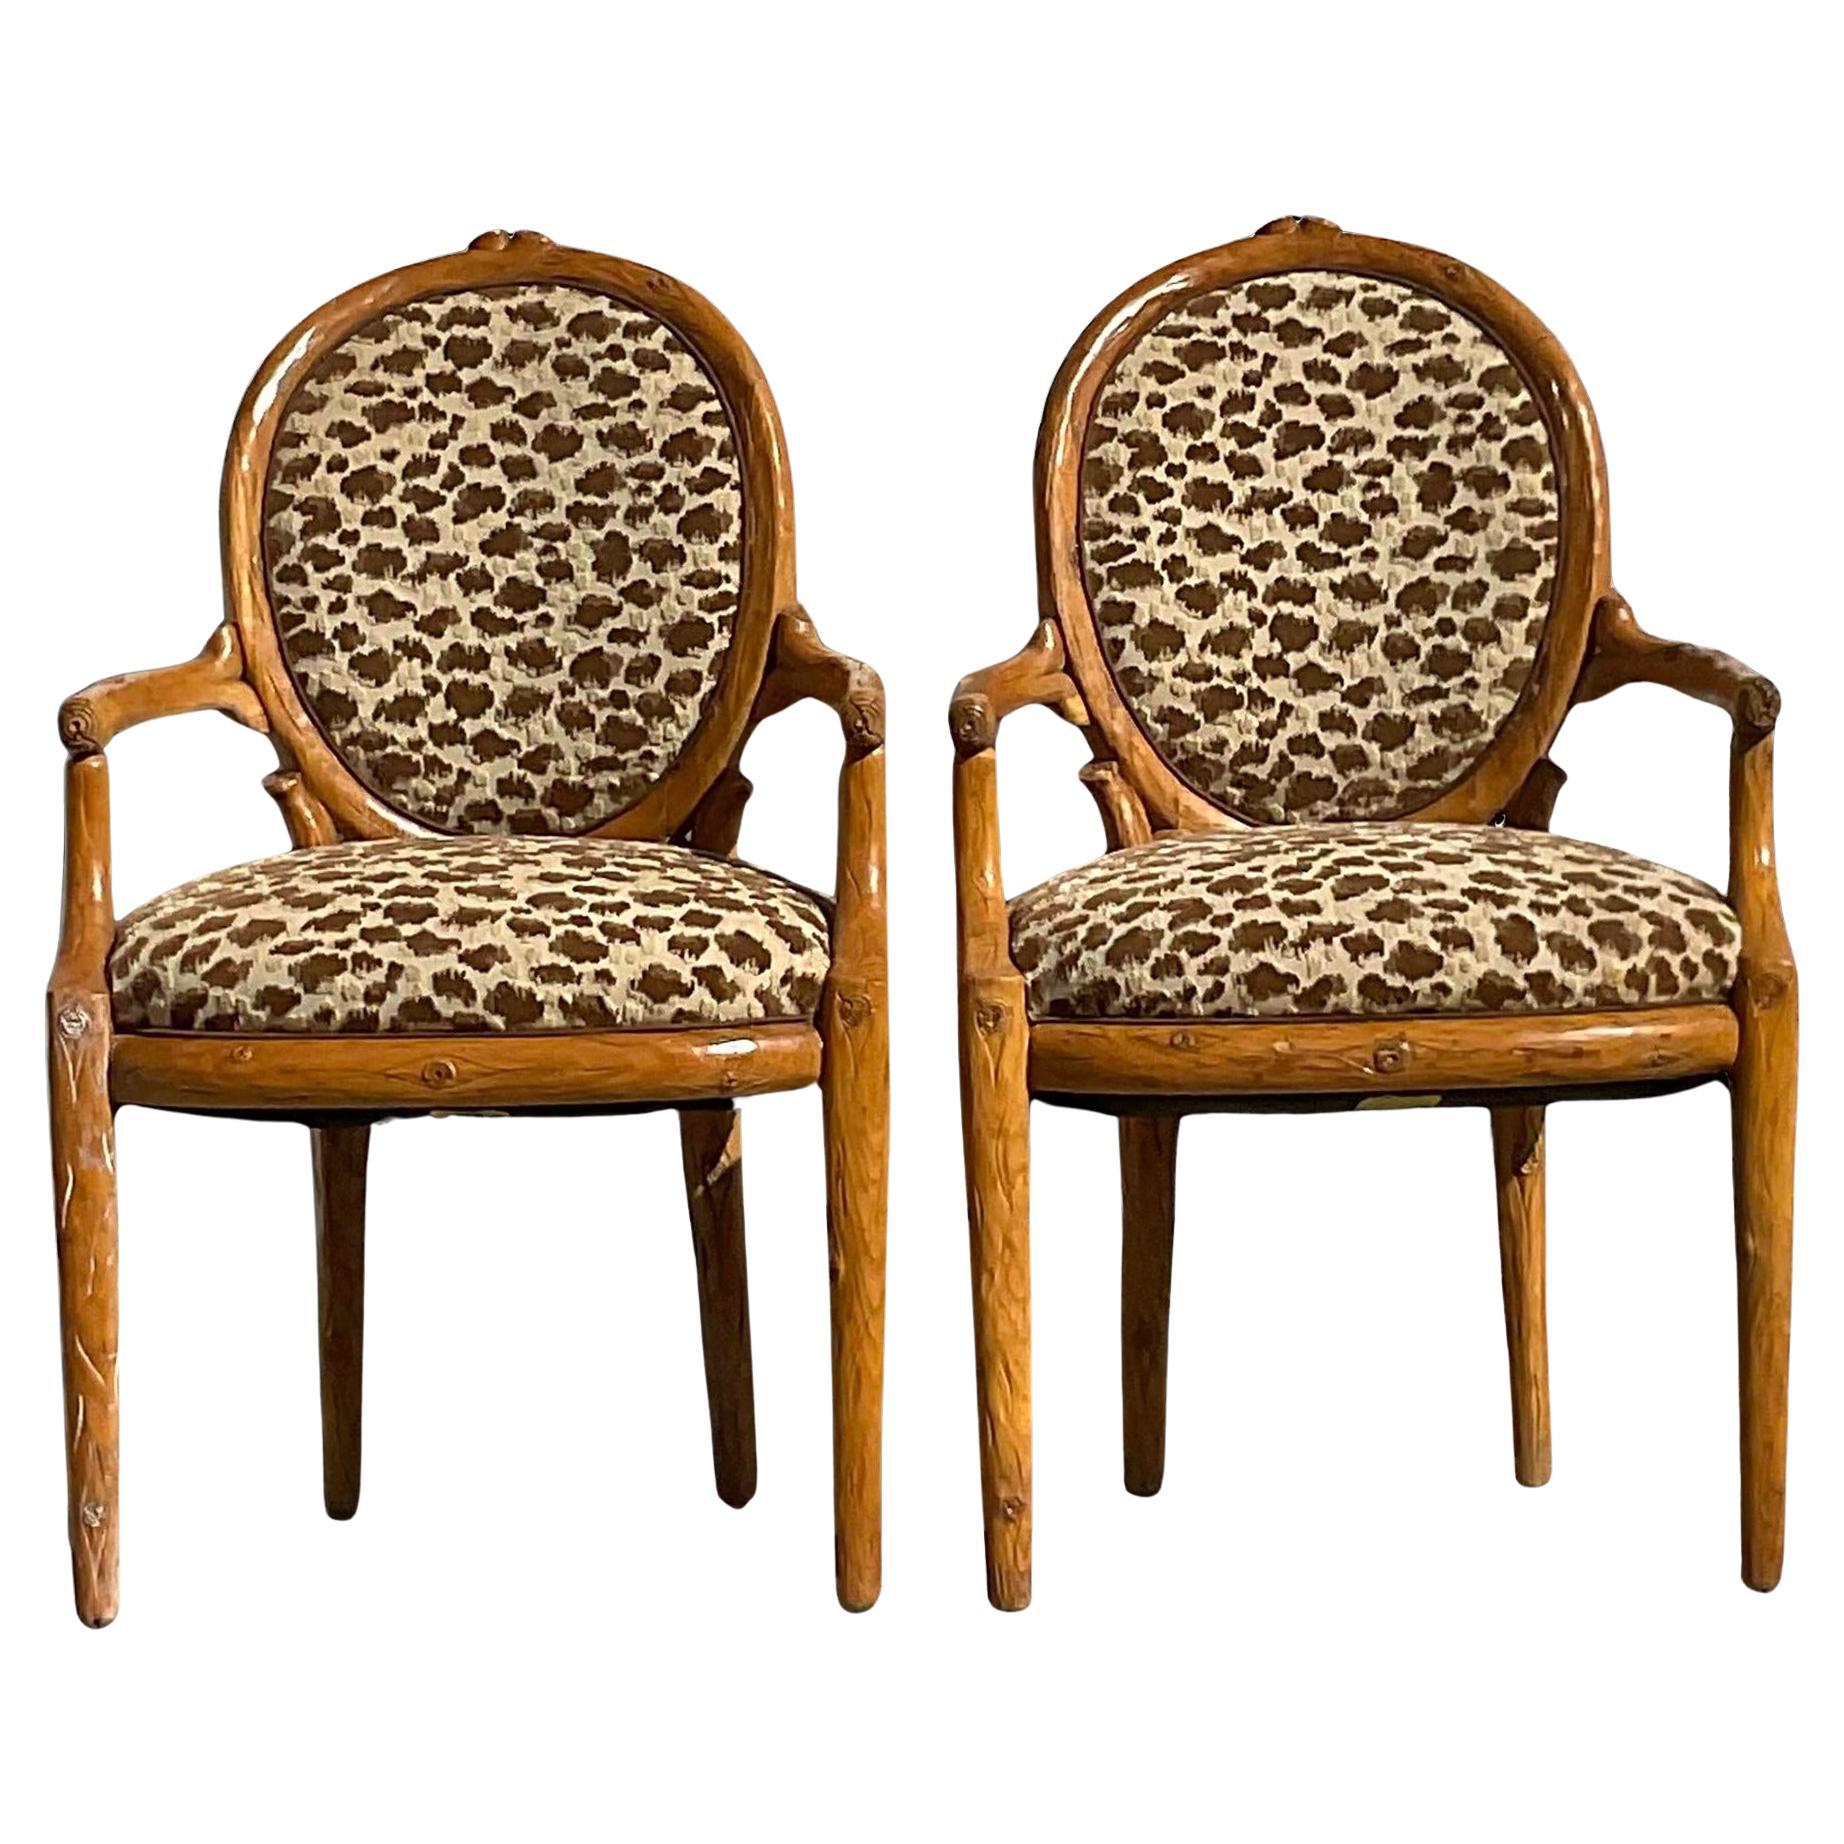 Vintage Boho Carved Faux Bois Arm Chairs - a Pair For Sale